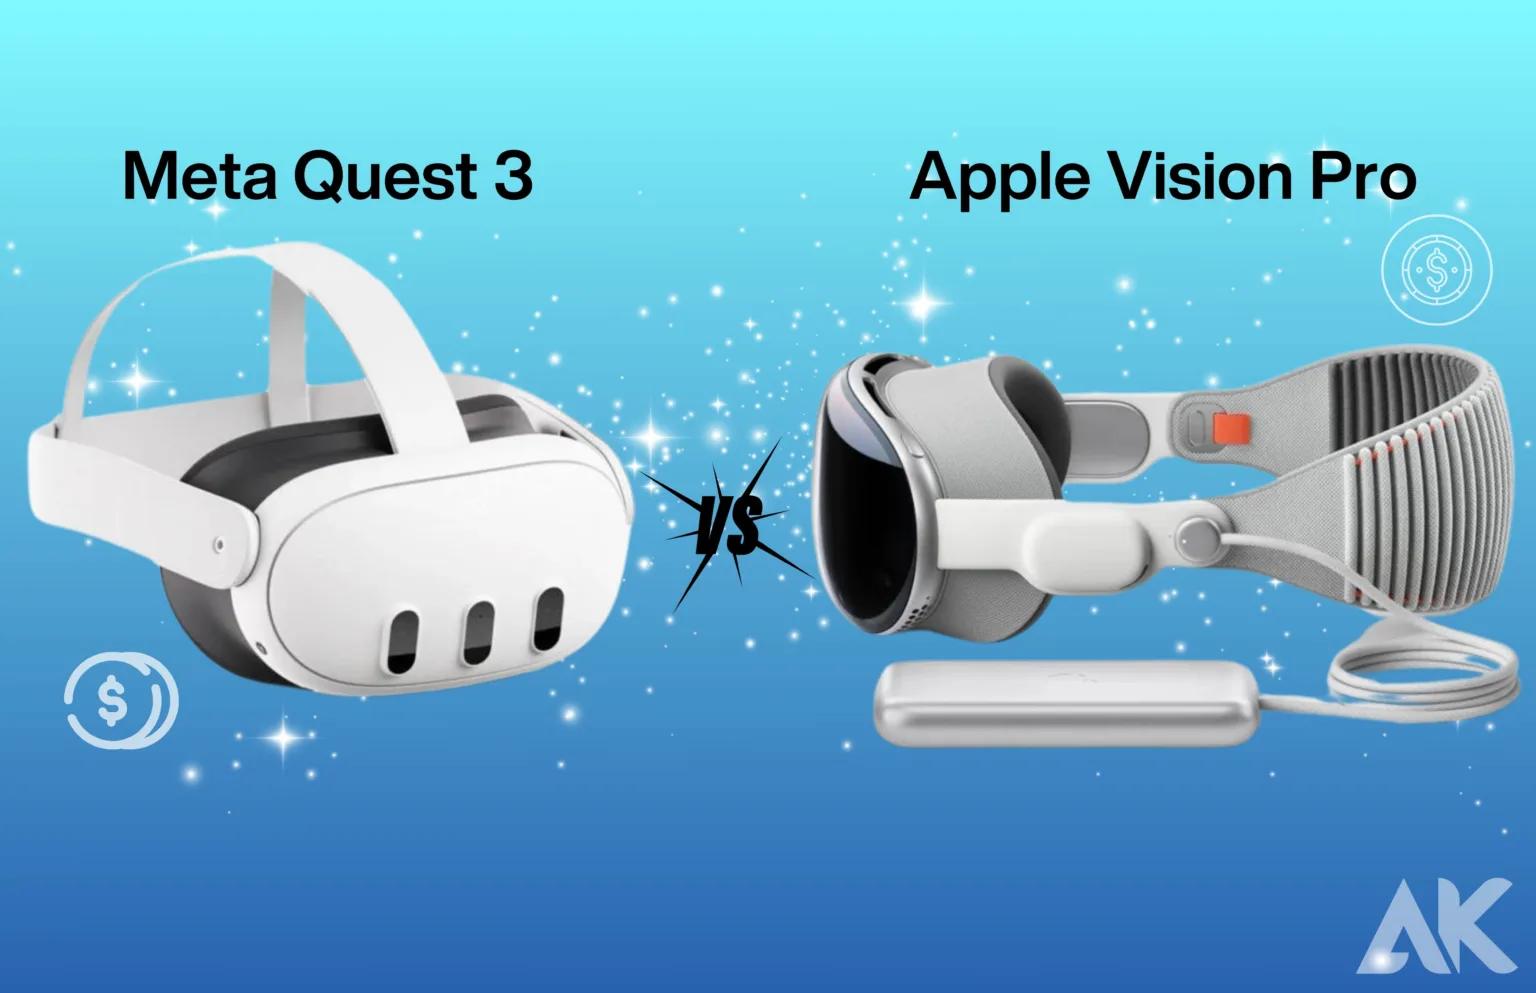 Is Meta Quest 3 or Apple Vision Pro worth the price?